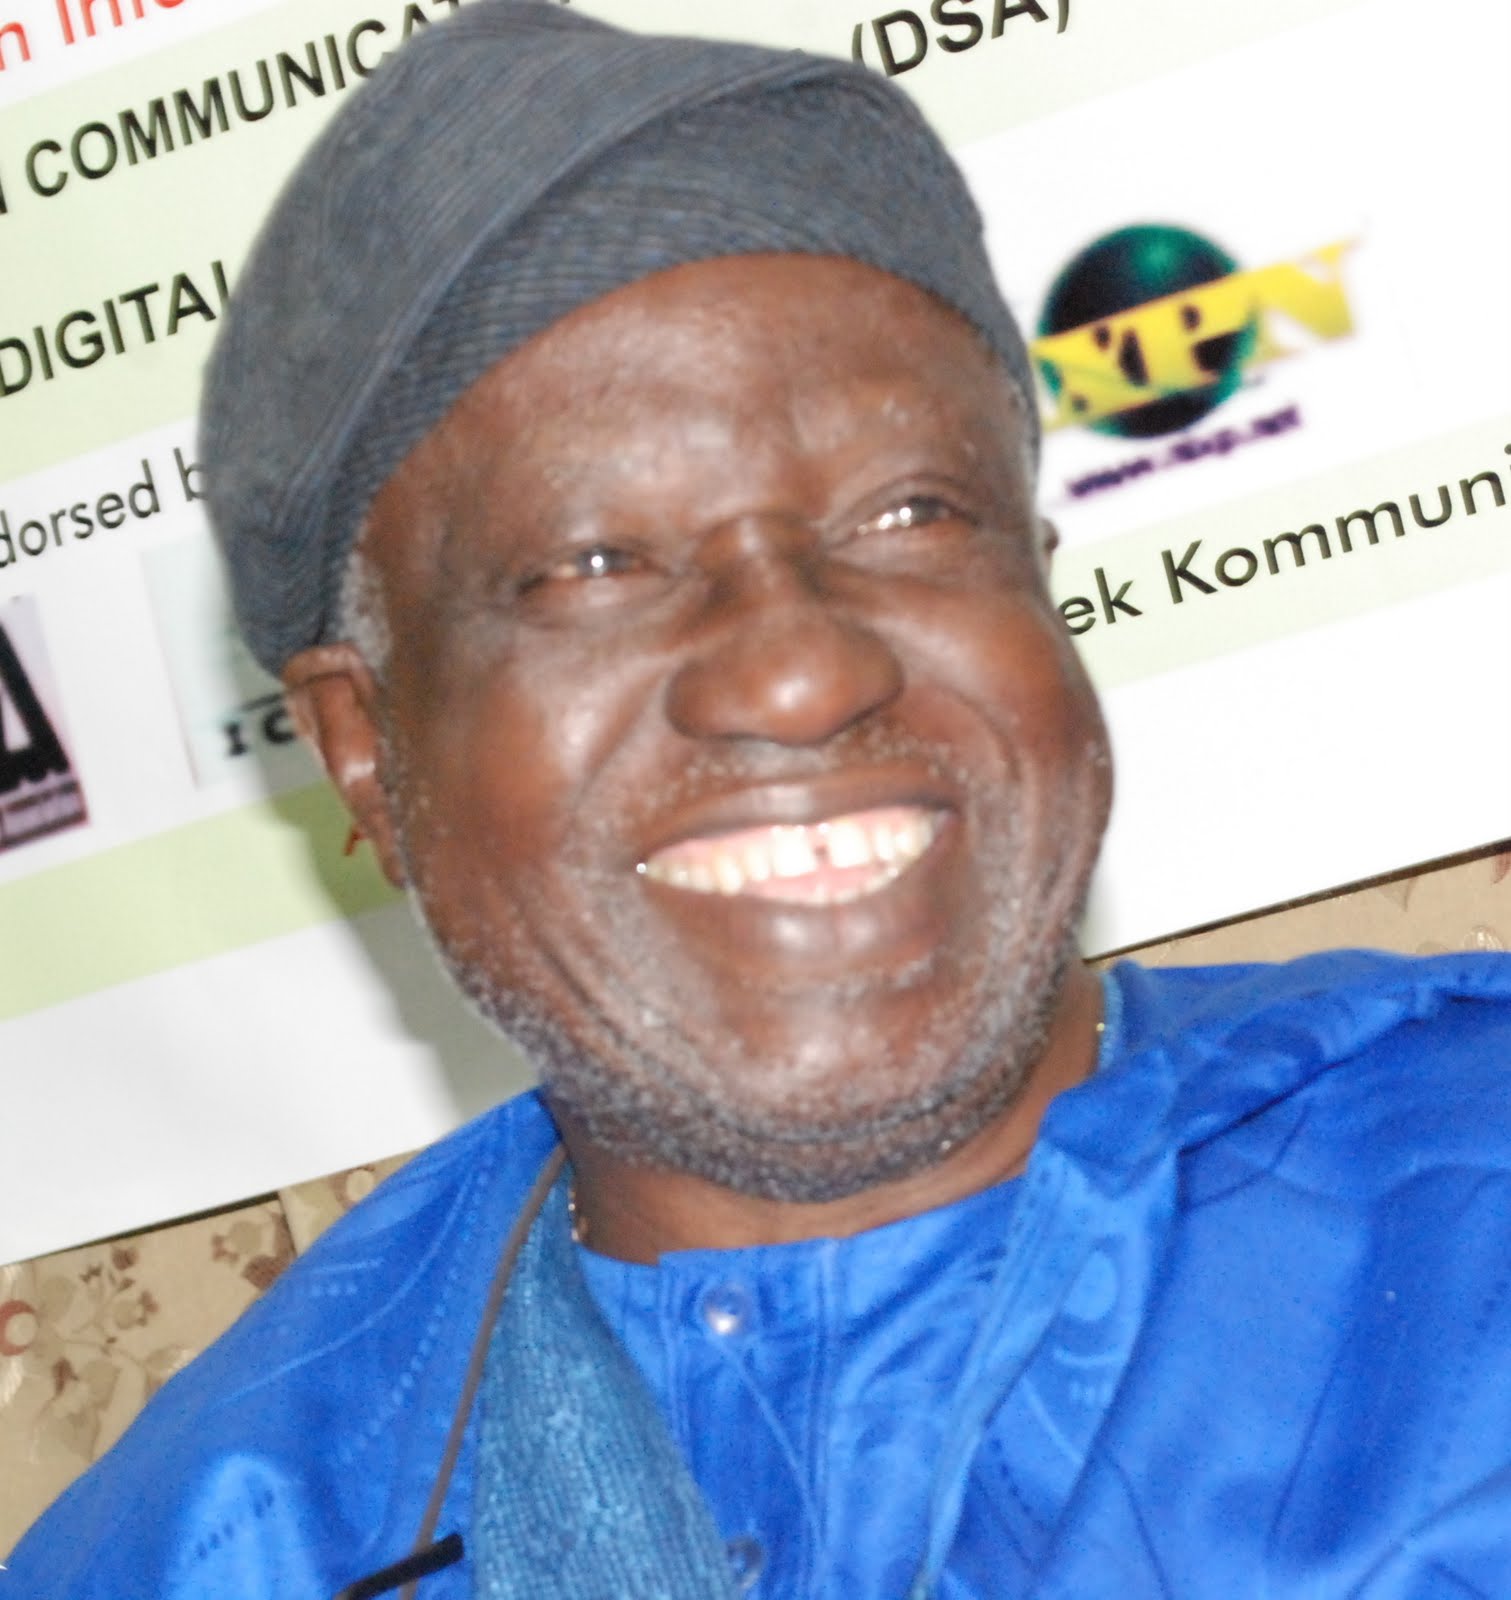 Former Minister of Communications, Olawale Ige is dead